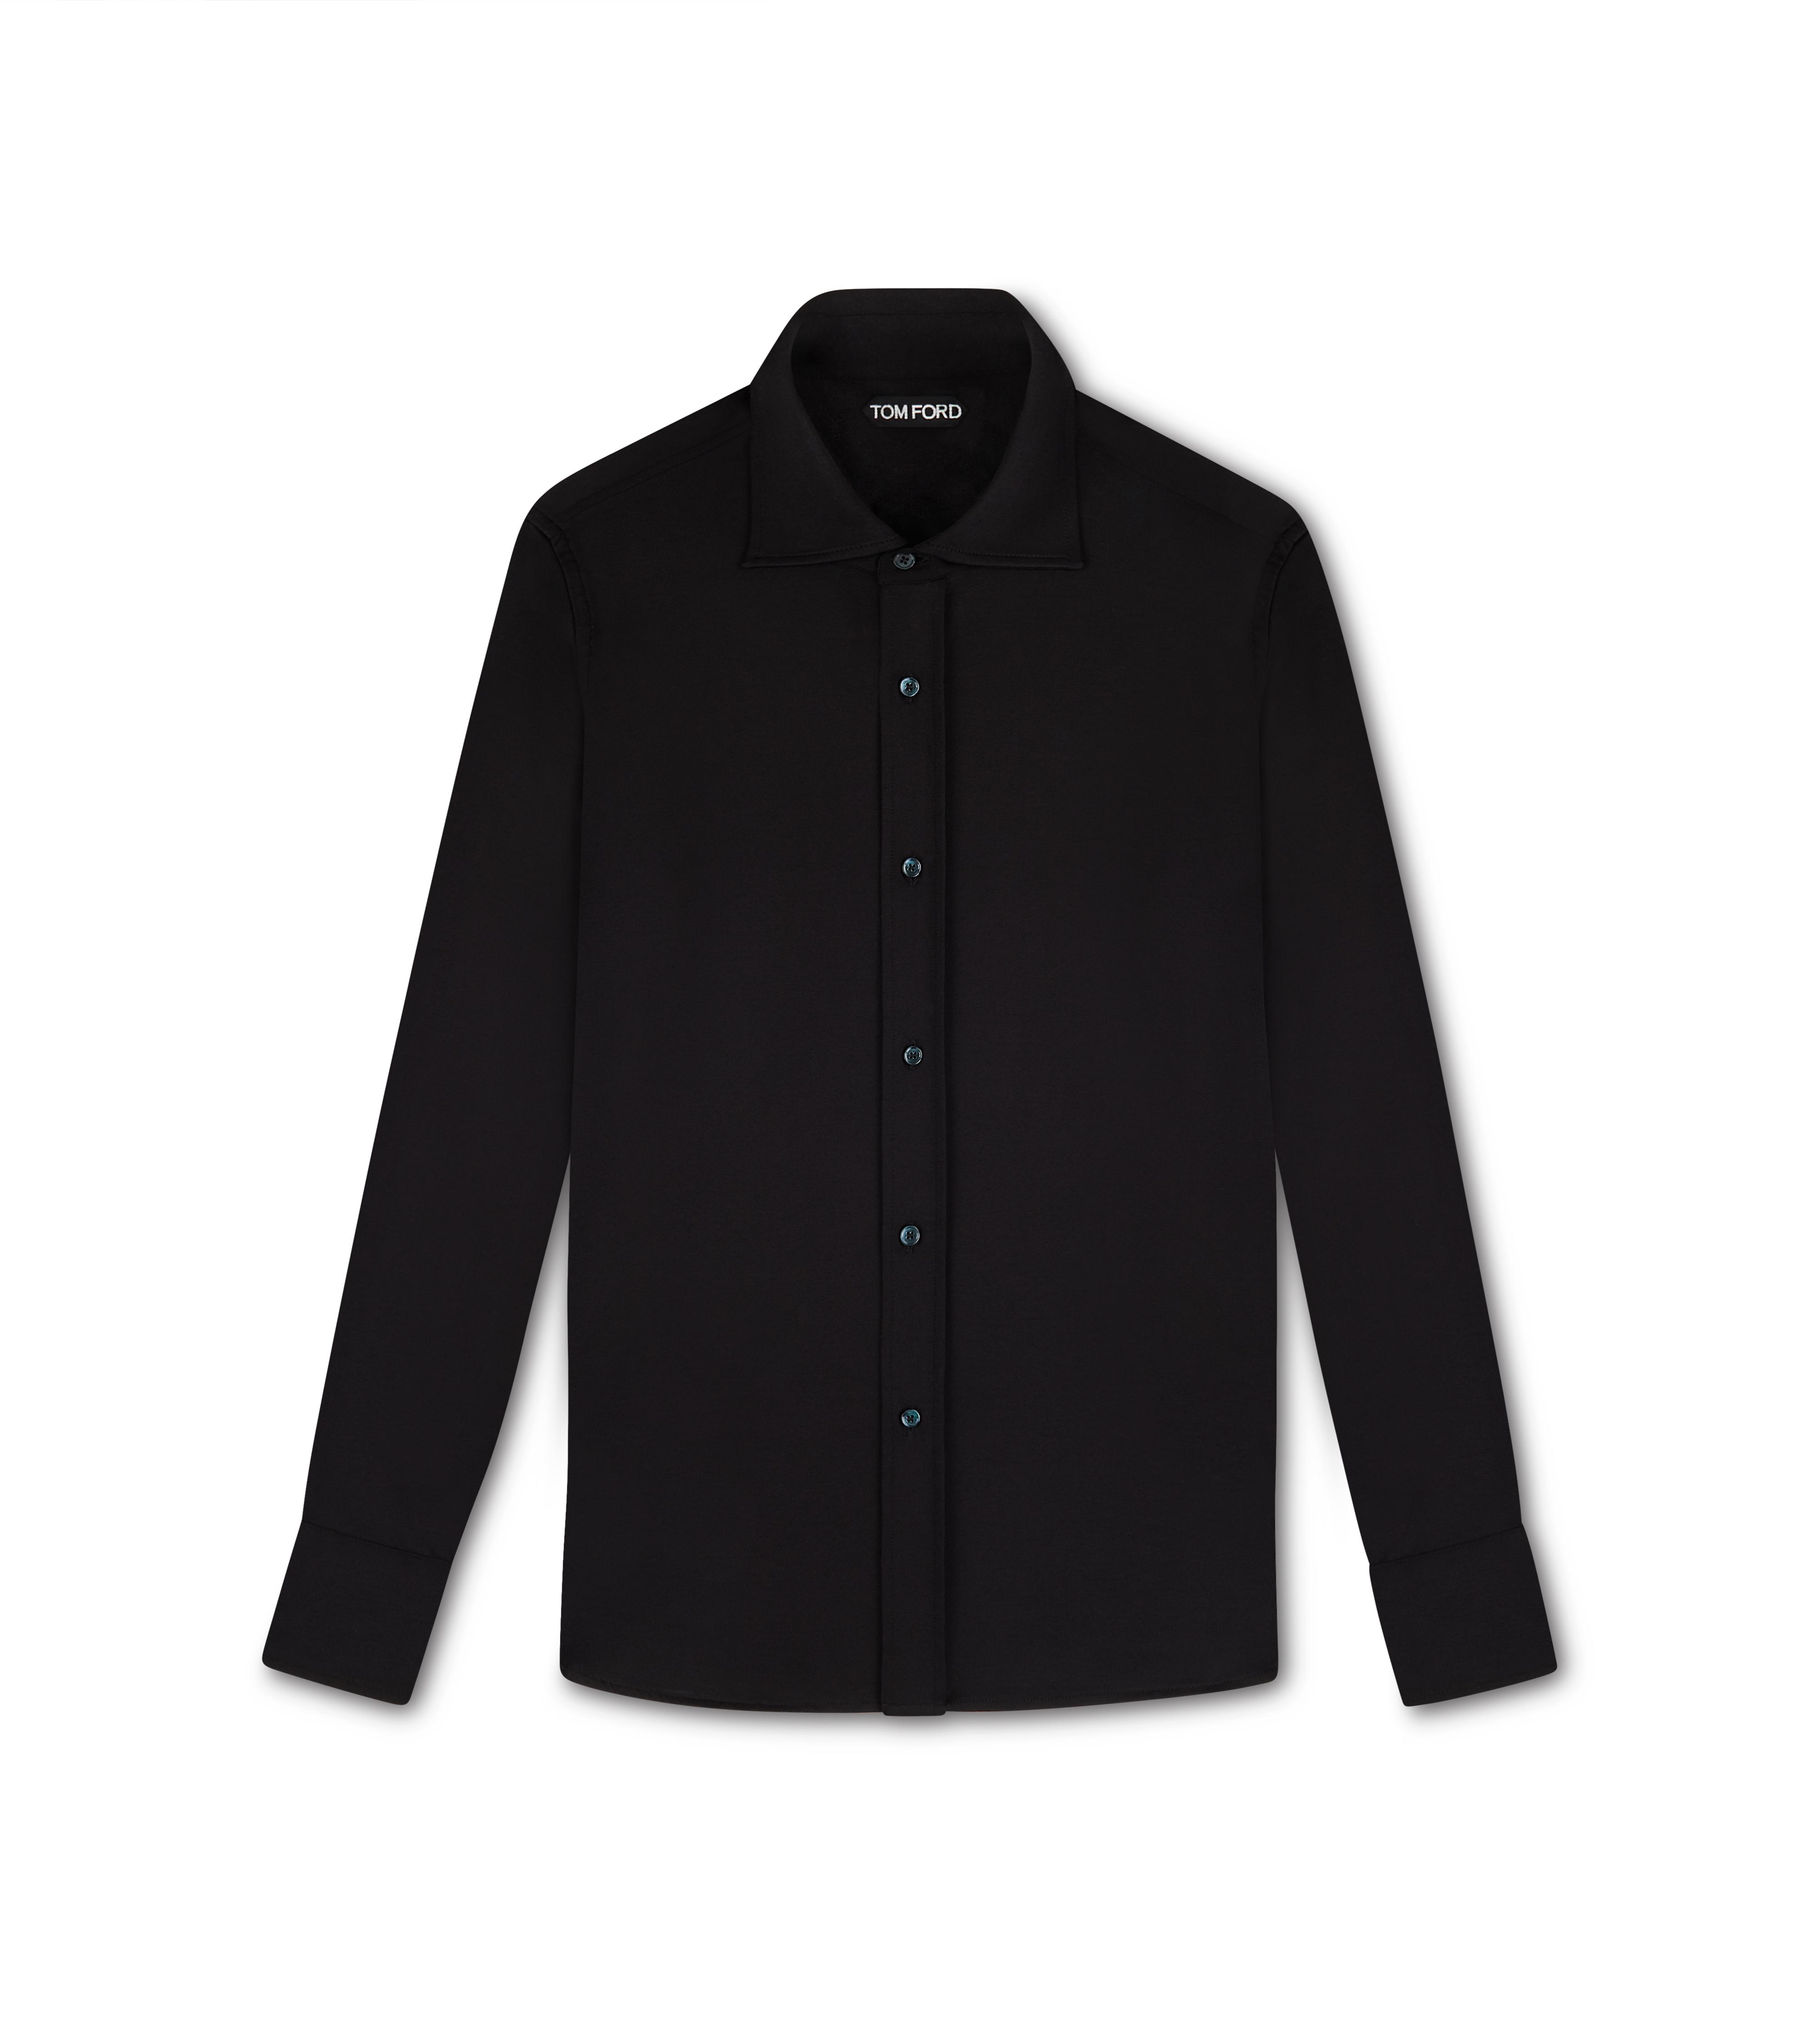 Tom Ford JERSEY COTTON BLEND TAILORED 